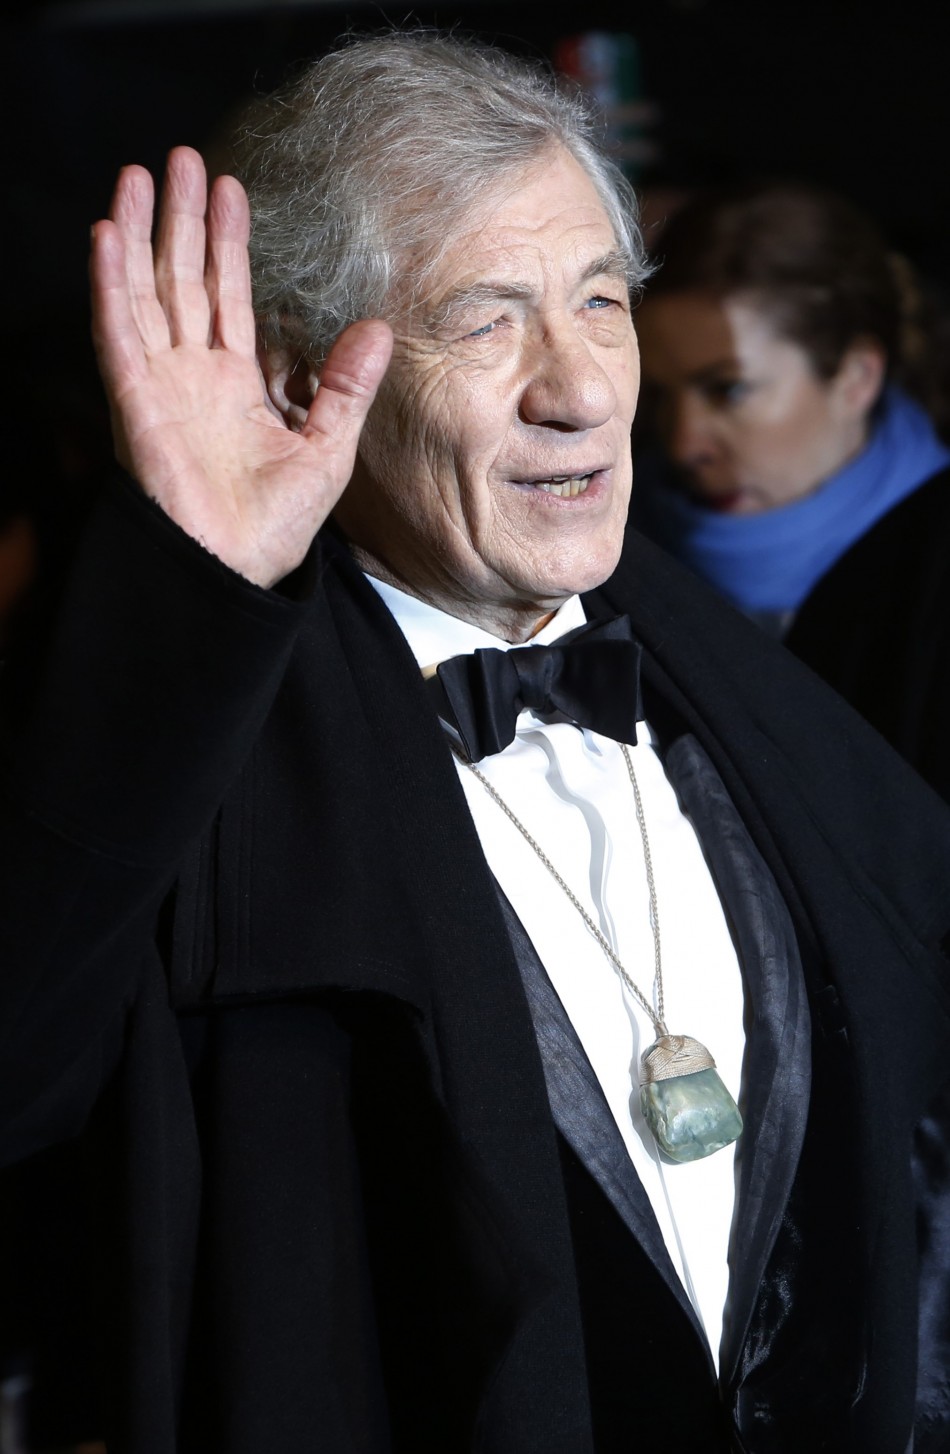 Actor Ian McKellen arrives for the royal premiere of the film The Hobbit - An Unexpected Journey in central London